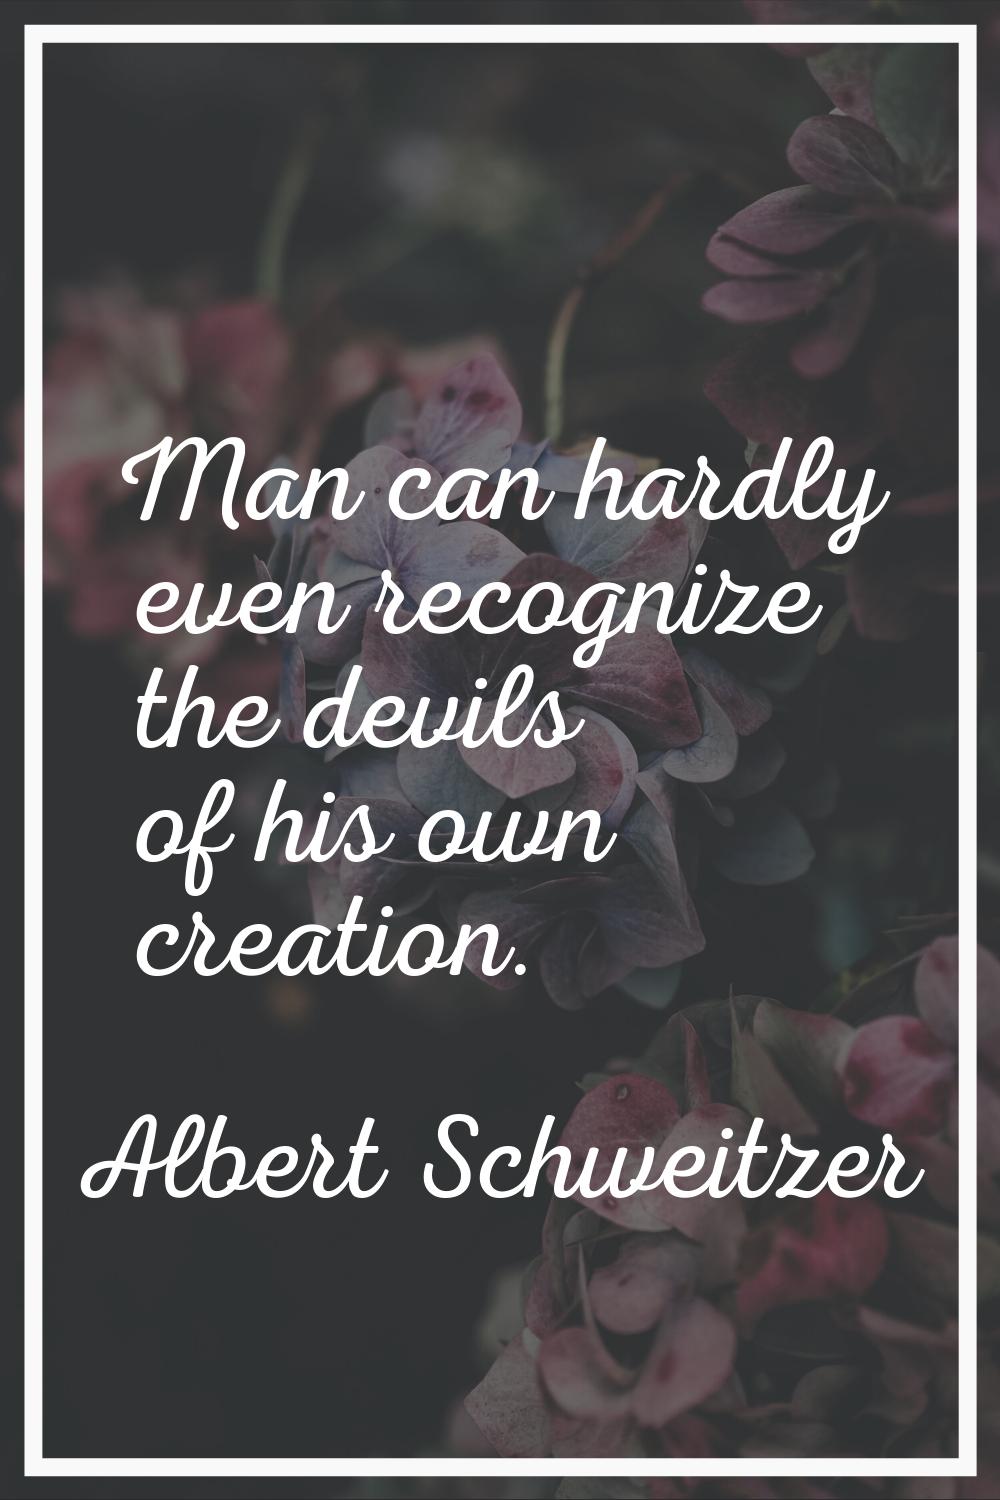 Man can hardly even recognize the devils of his own creation.